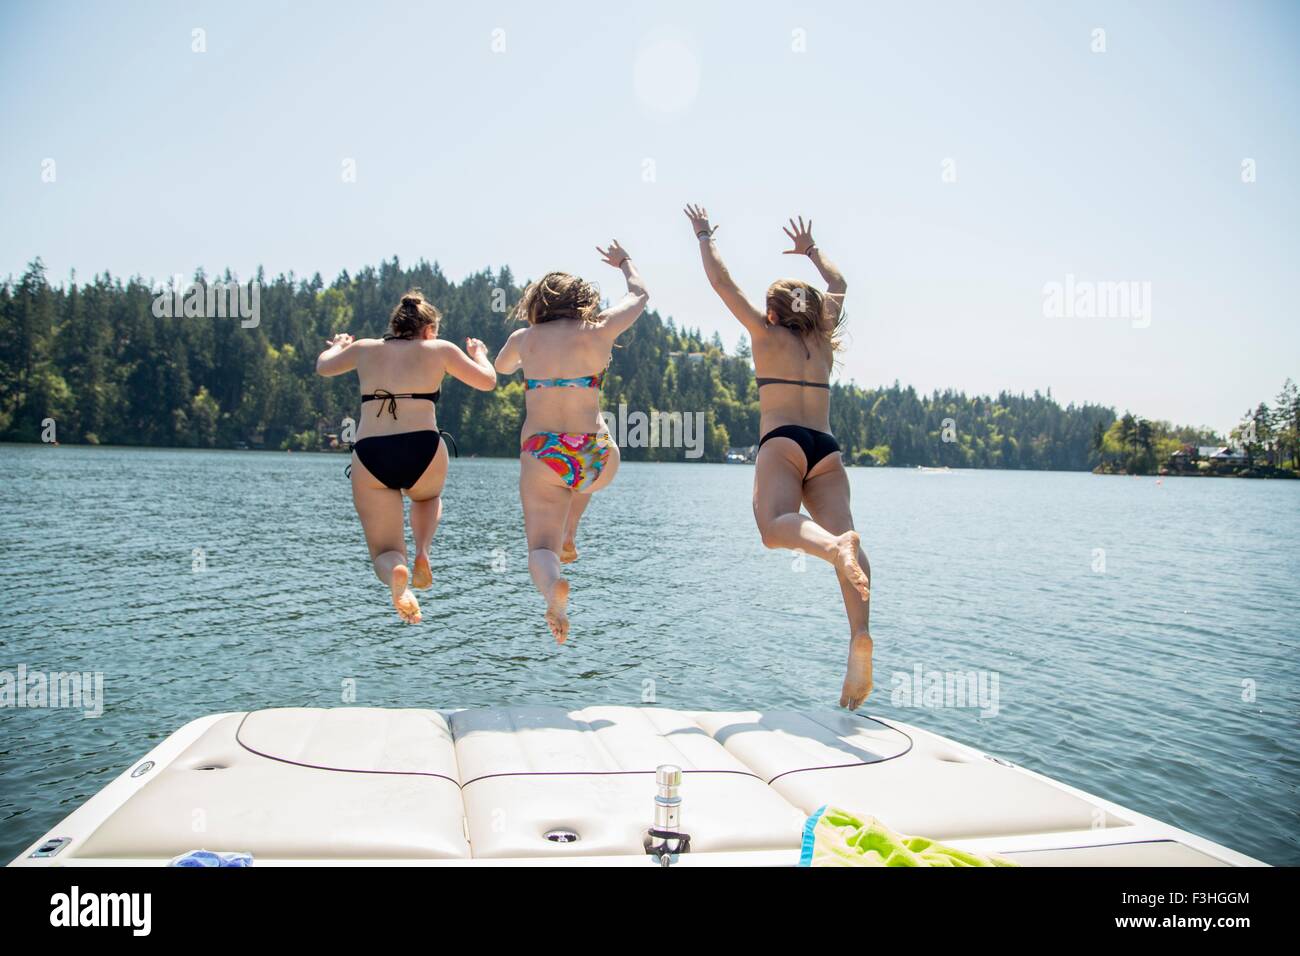 Rear view of three young women jumping from pier, Lake Oswego, Oregon, USA Stock Photo